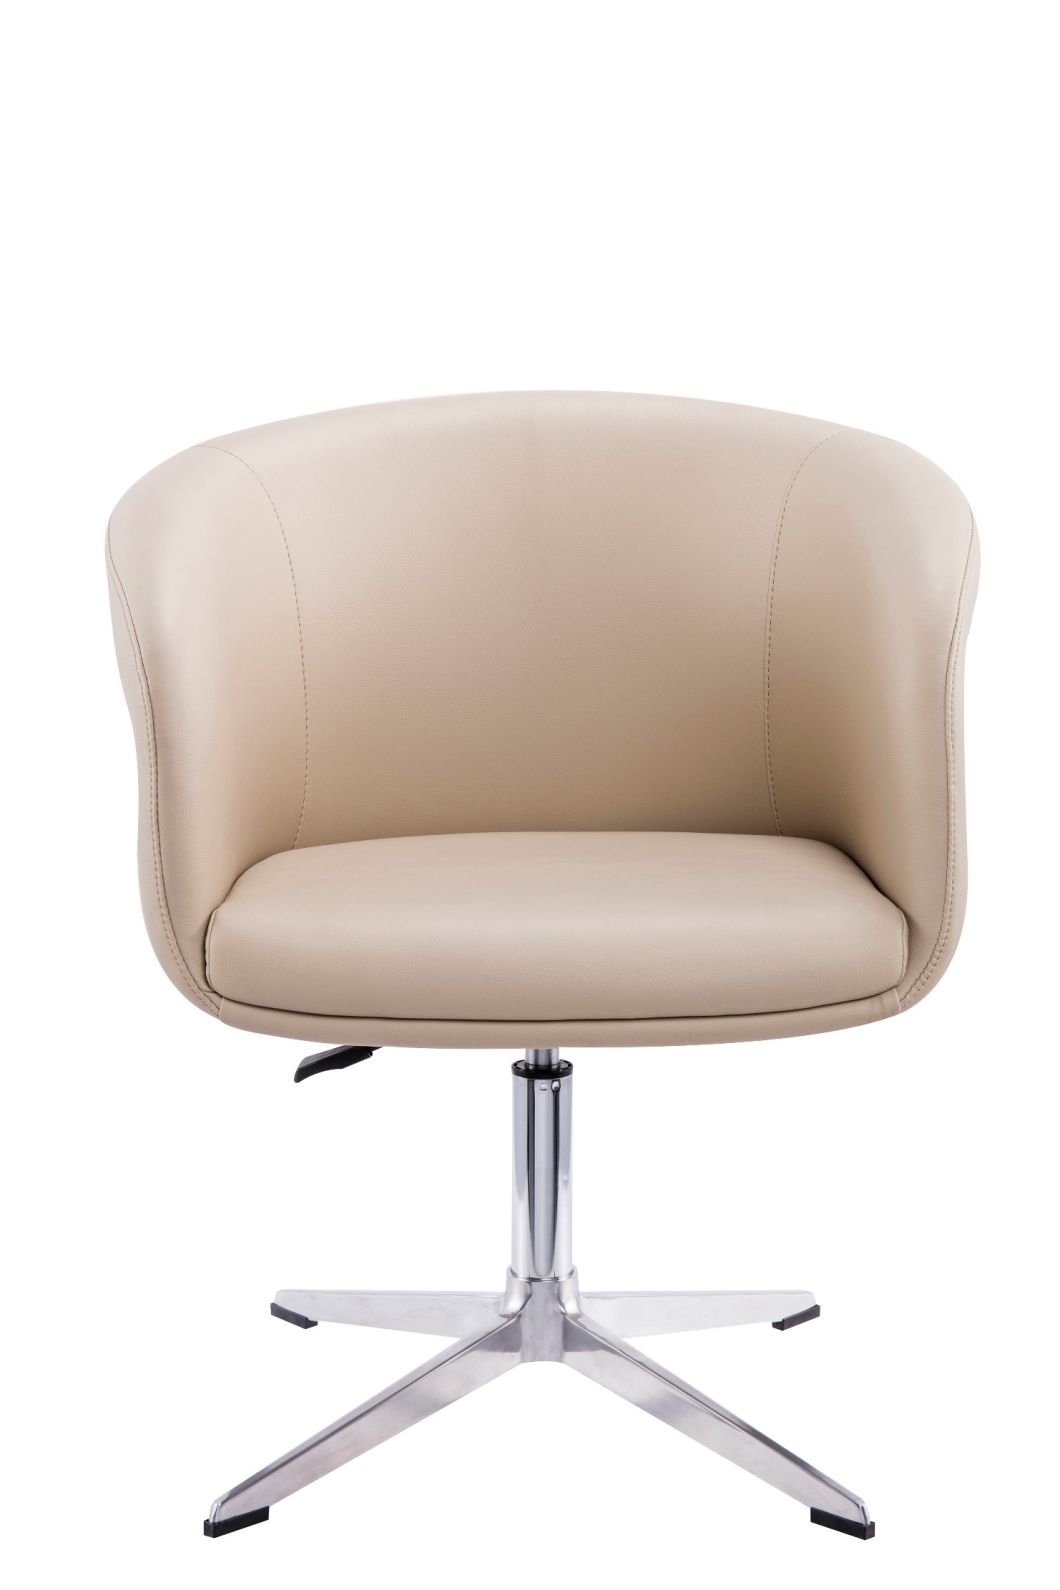 Modern Contemporary Leisure Chair with Aluminum Base (HT-855B-2)